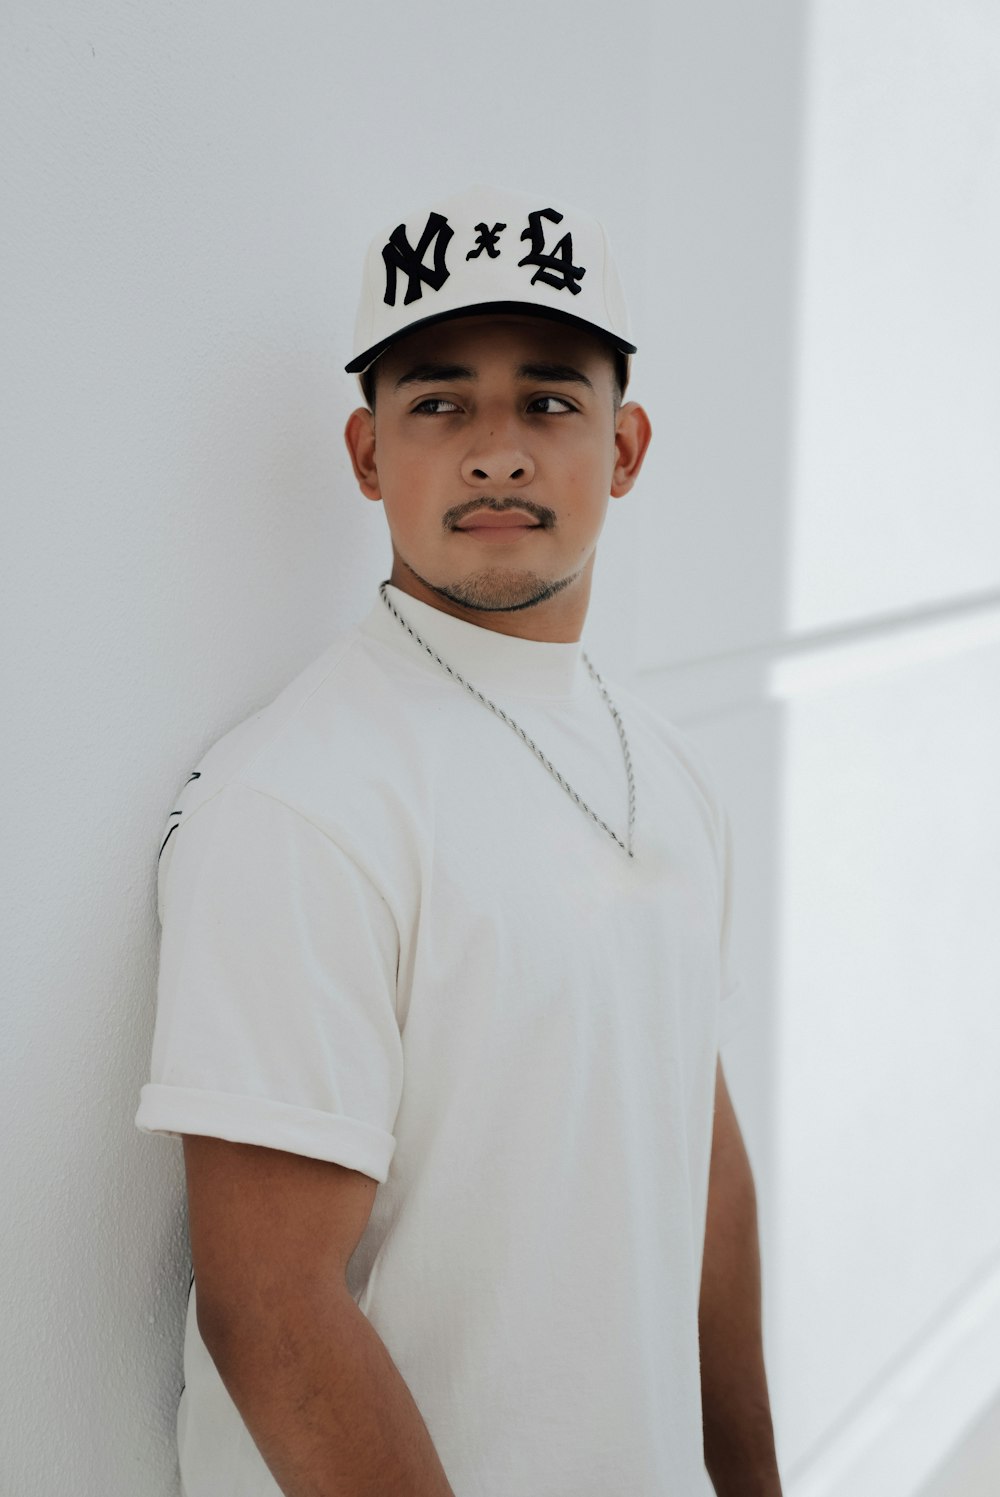 a young man wearing a baseball cap leaning against a wall